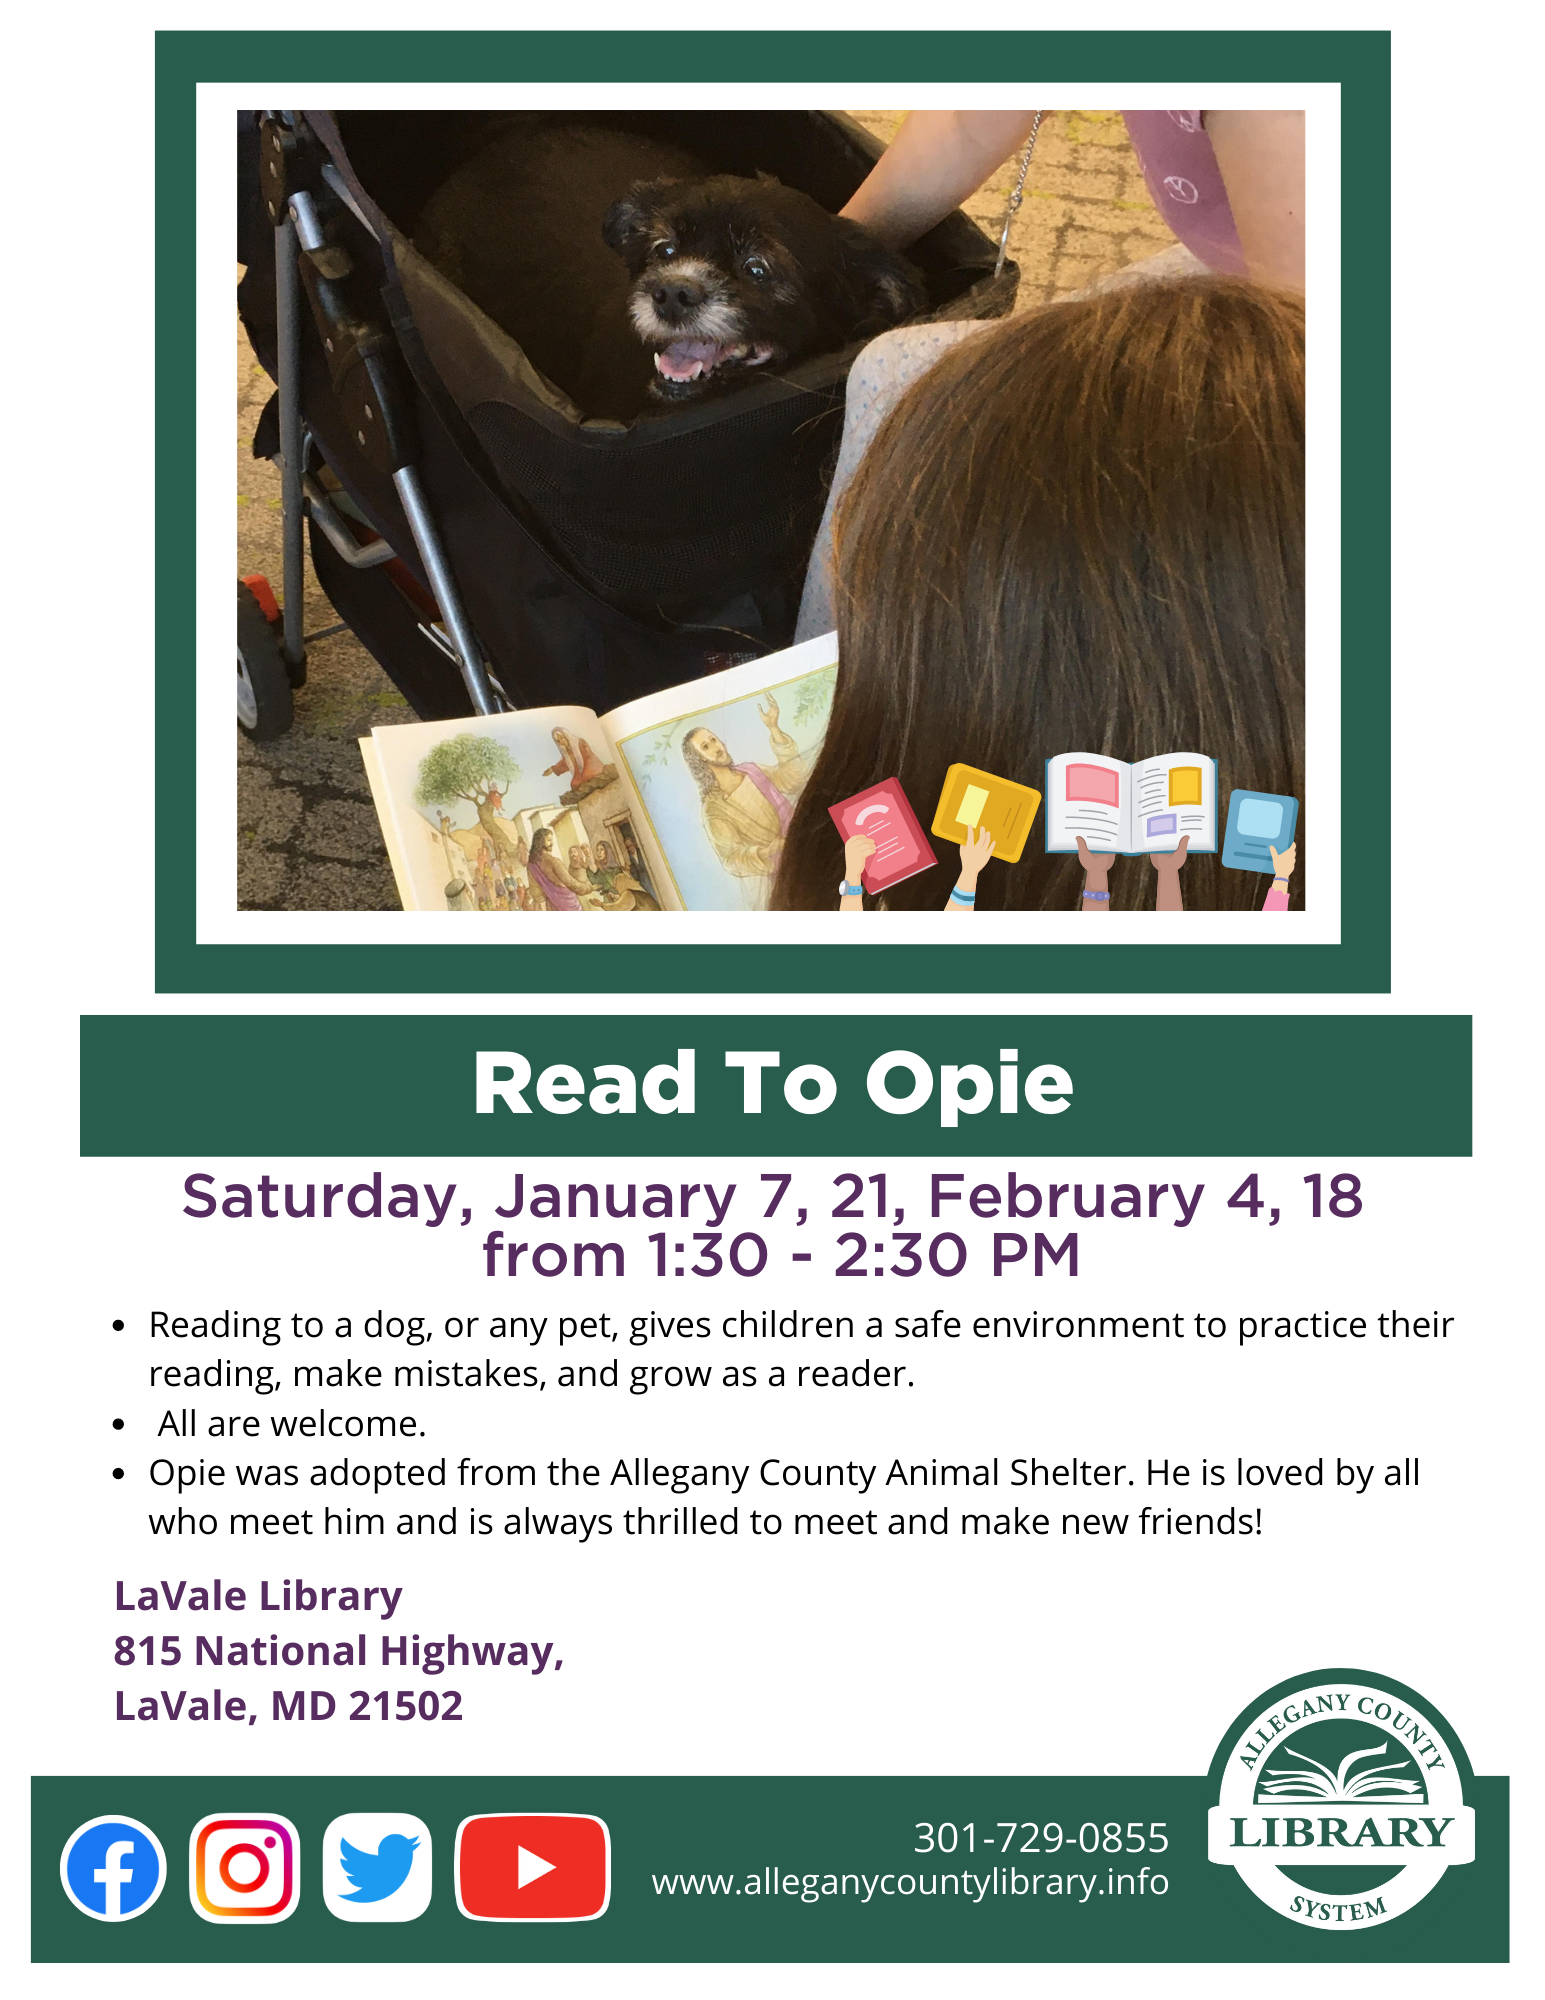 Opie the dog being read to by a child. 